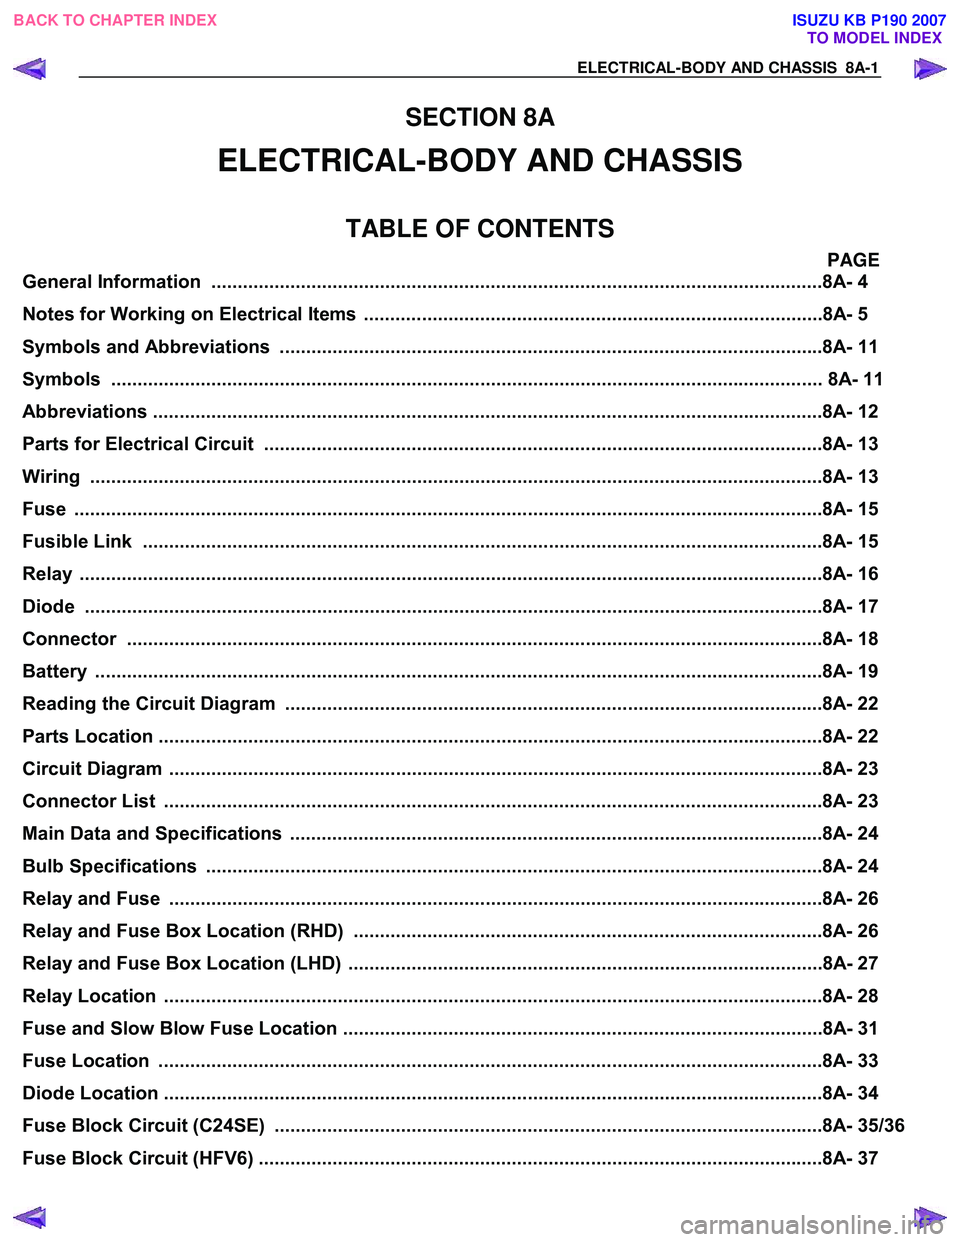 ISUZU KB P190 2007  Workshop Repair Manual ELECTRICAL-BODY AND CHASSIS  8A-1 
SECTION 8A 
ELECTRICAL-BODY AND CHASSIS 
TABLE OF CONTENTS 
PAGE 
General Information ...............................................................................